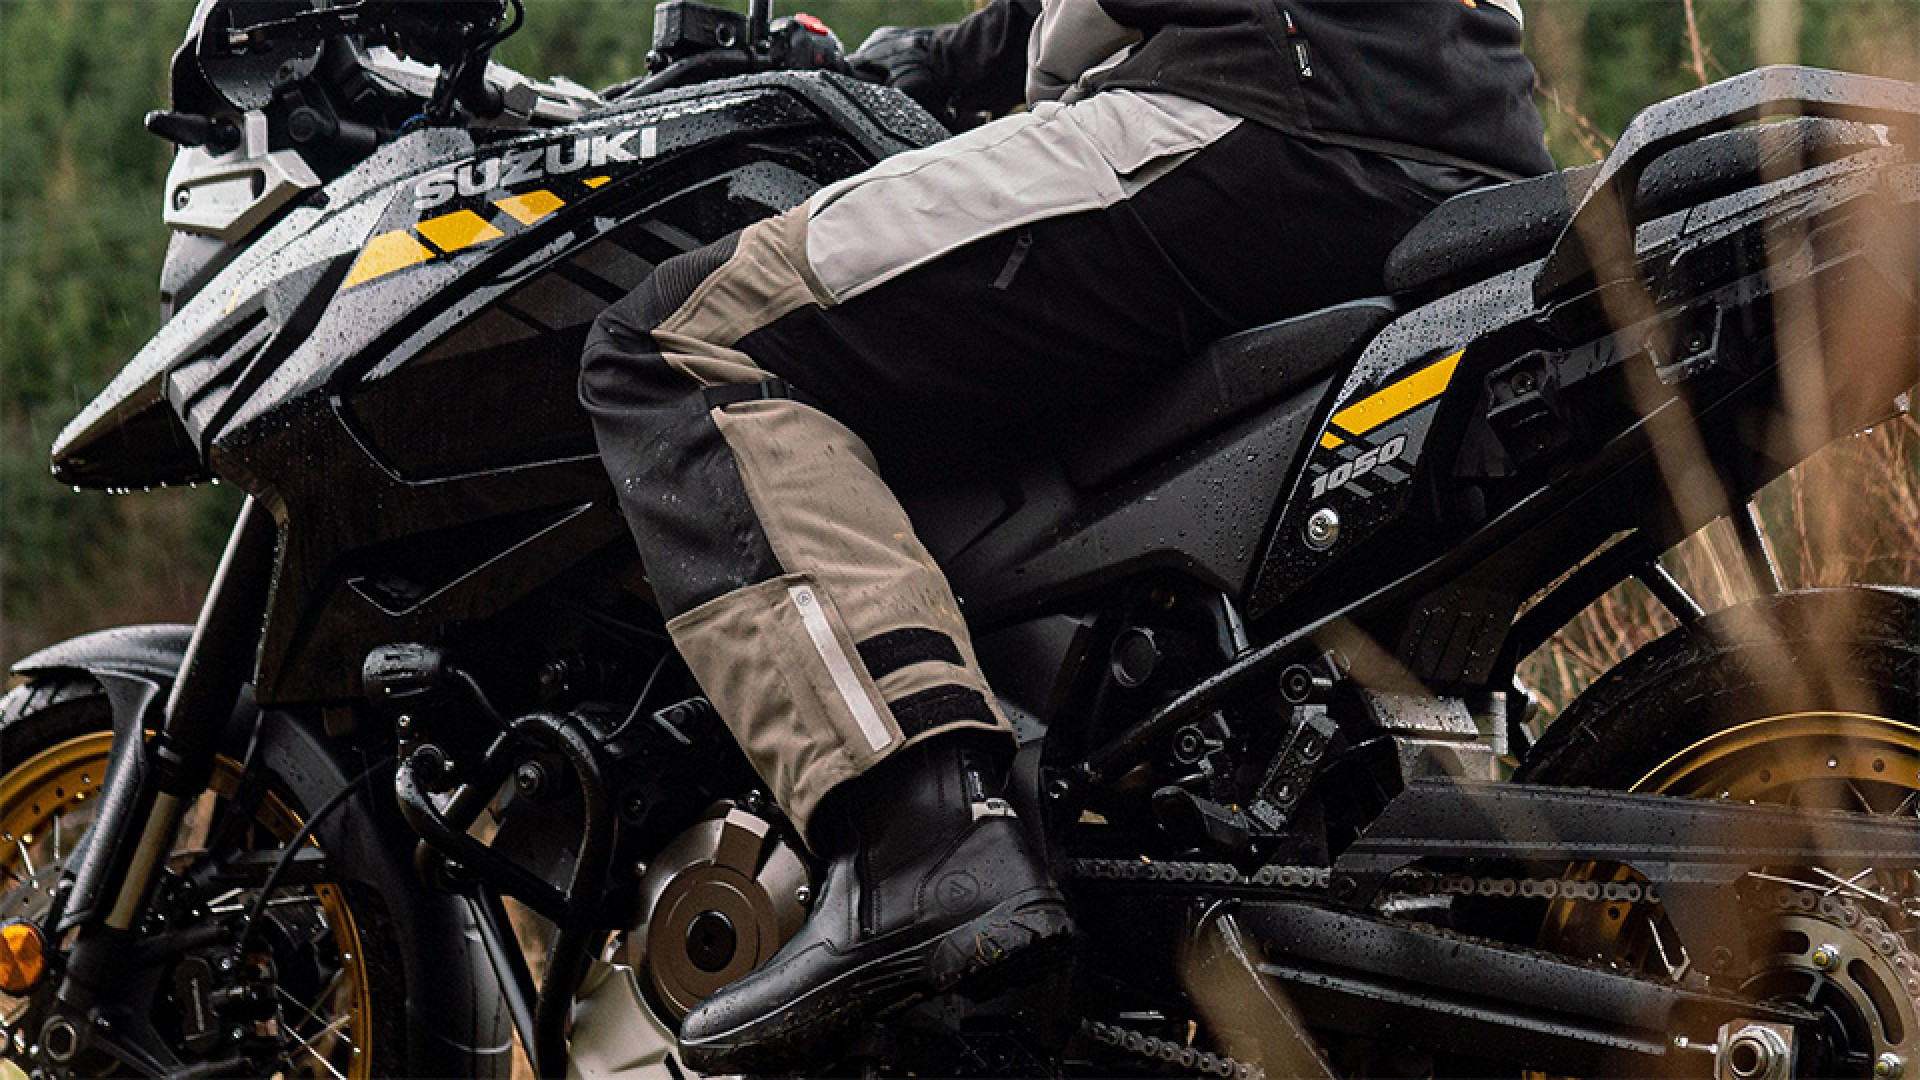 https://www.raceleathers.co.uk/image/cache/catalog/Blog%20Images/Oxford%20Stormland%20Trousers%20Product%20Review-1920x1080.jpg